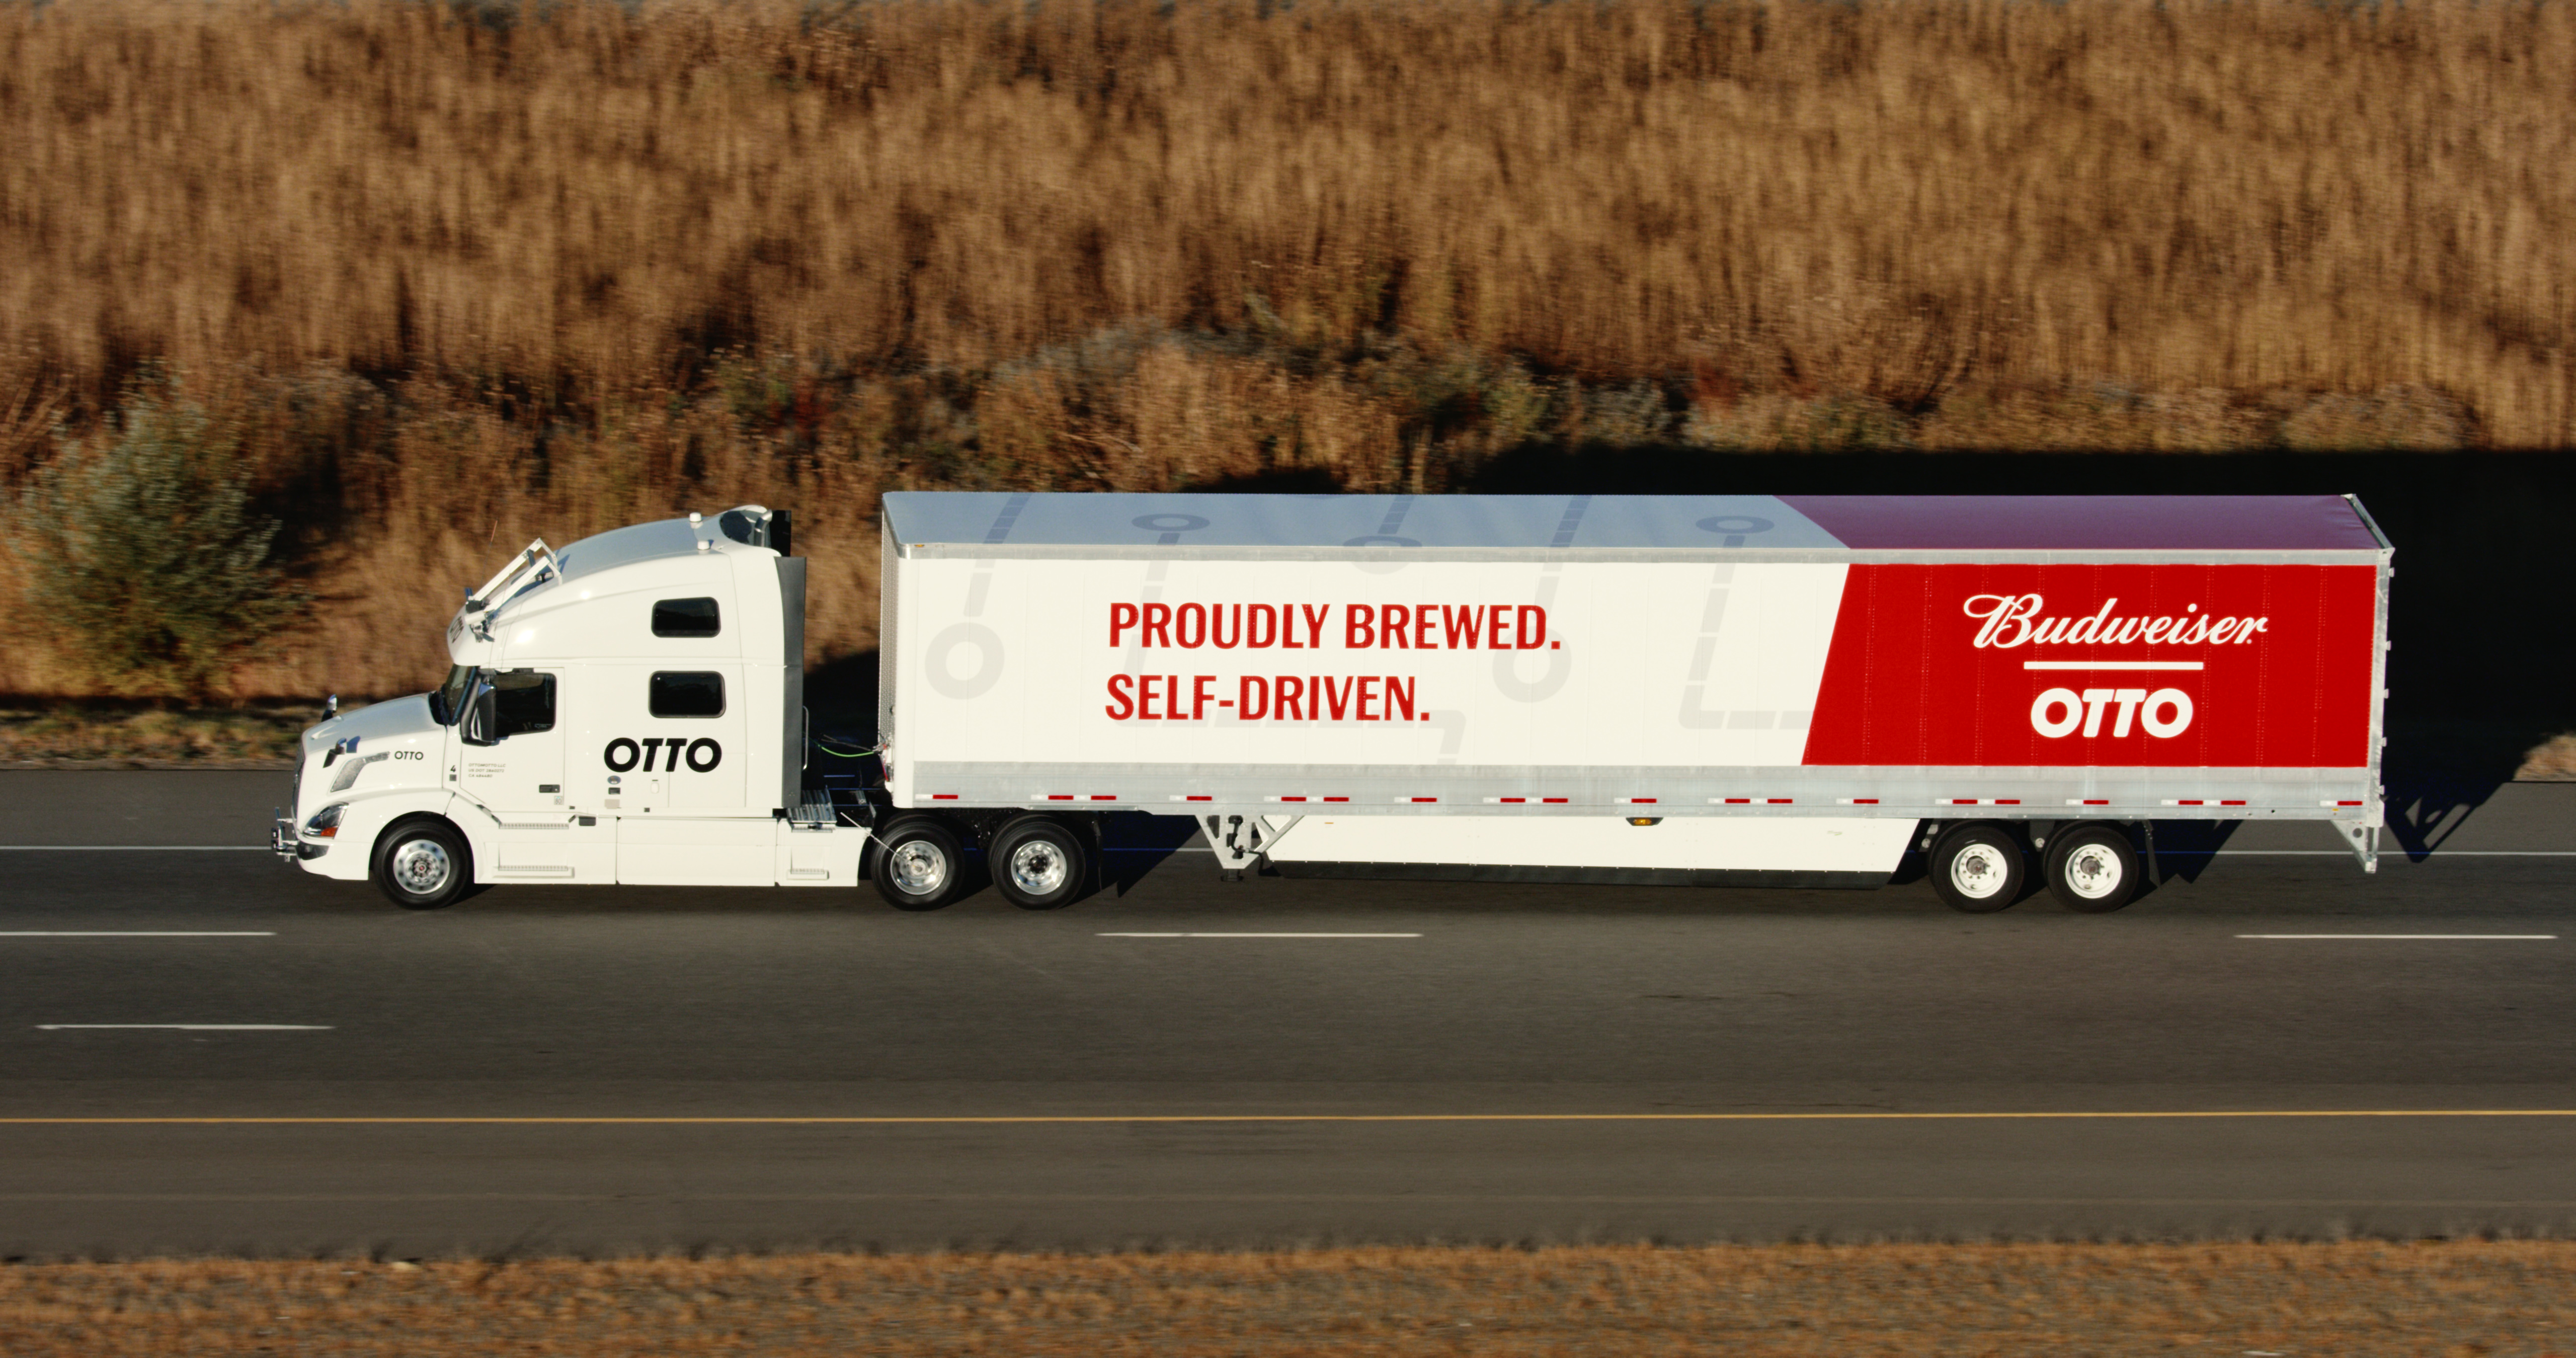 Otto and Anheuser-Busch Partner to Complete World's First Commercial Shipment by Self-Driving Truck